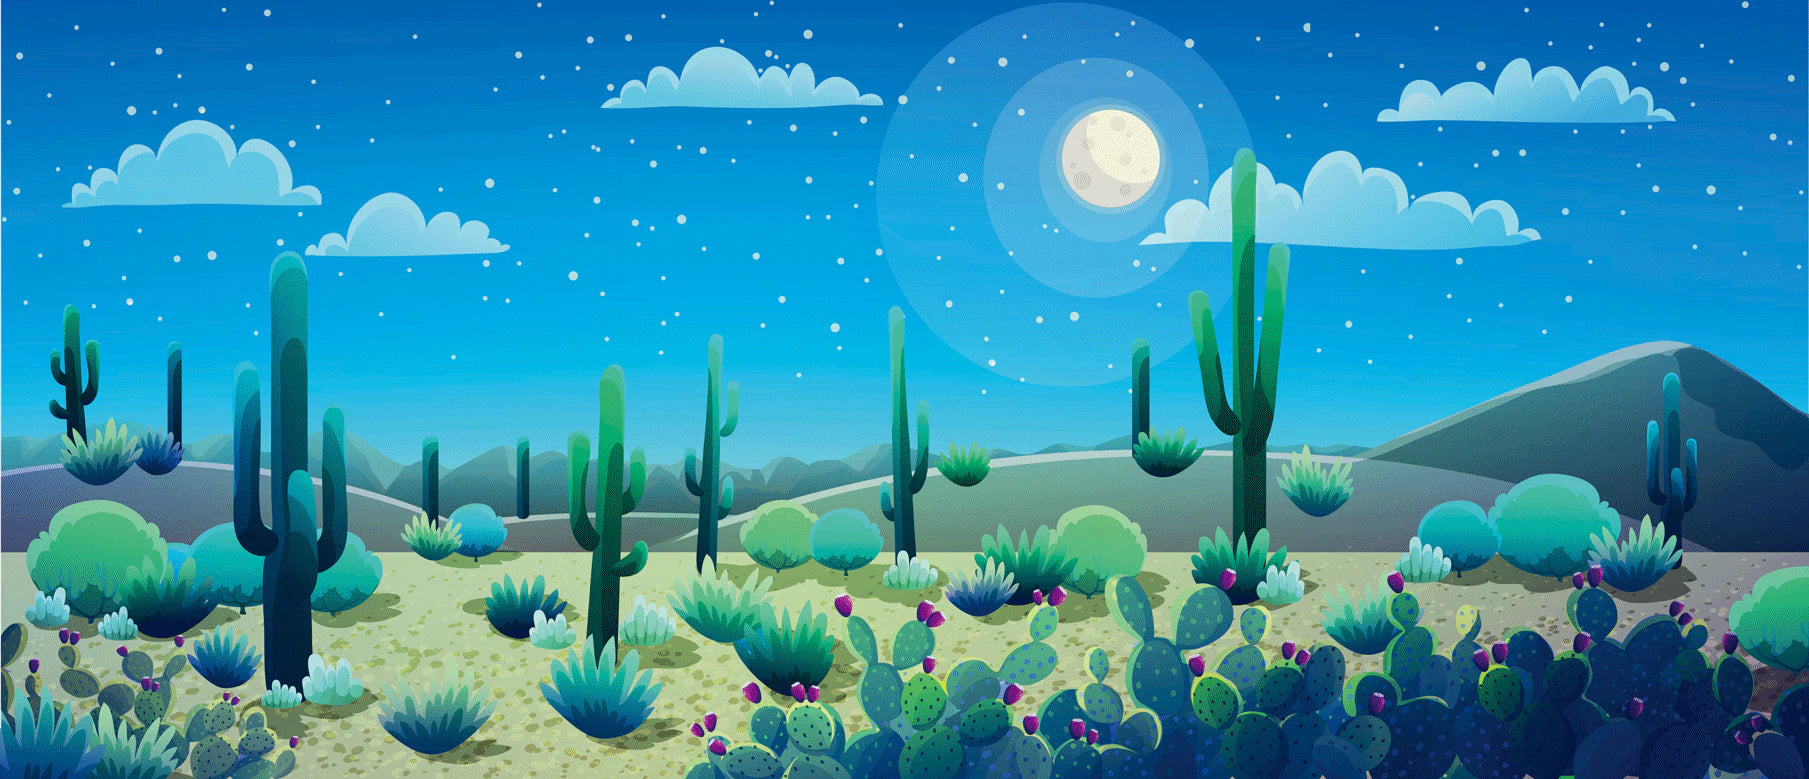 Home Decoration Wall Mural Featuring Cactus at Luna Starry Night